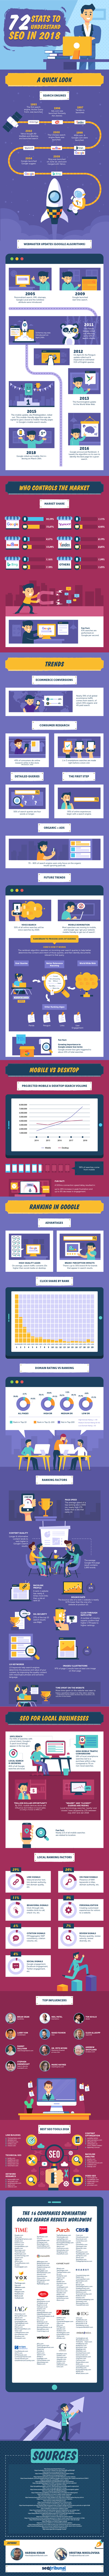 Infographic: SEO Stats 2018